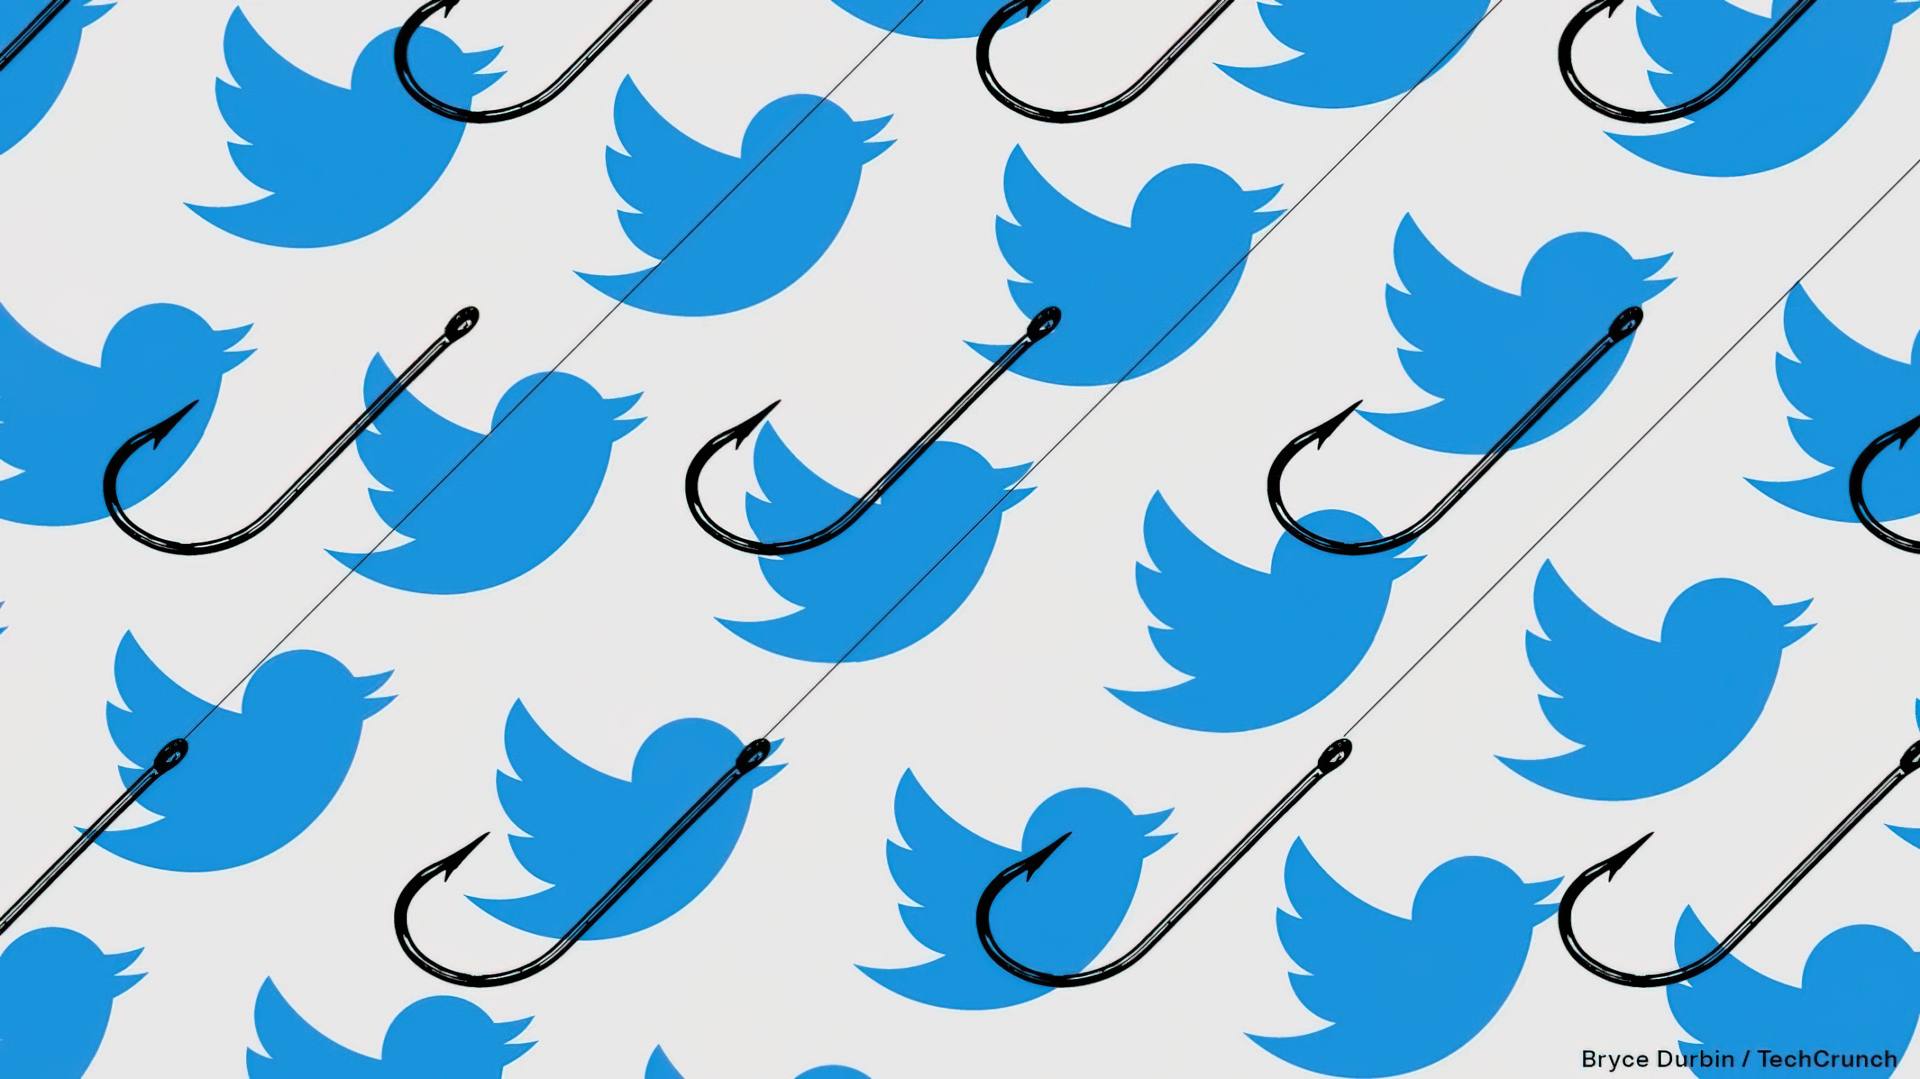 Twitter phishing attacks: Verification fee's unexpected side effects